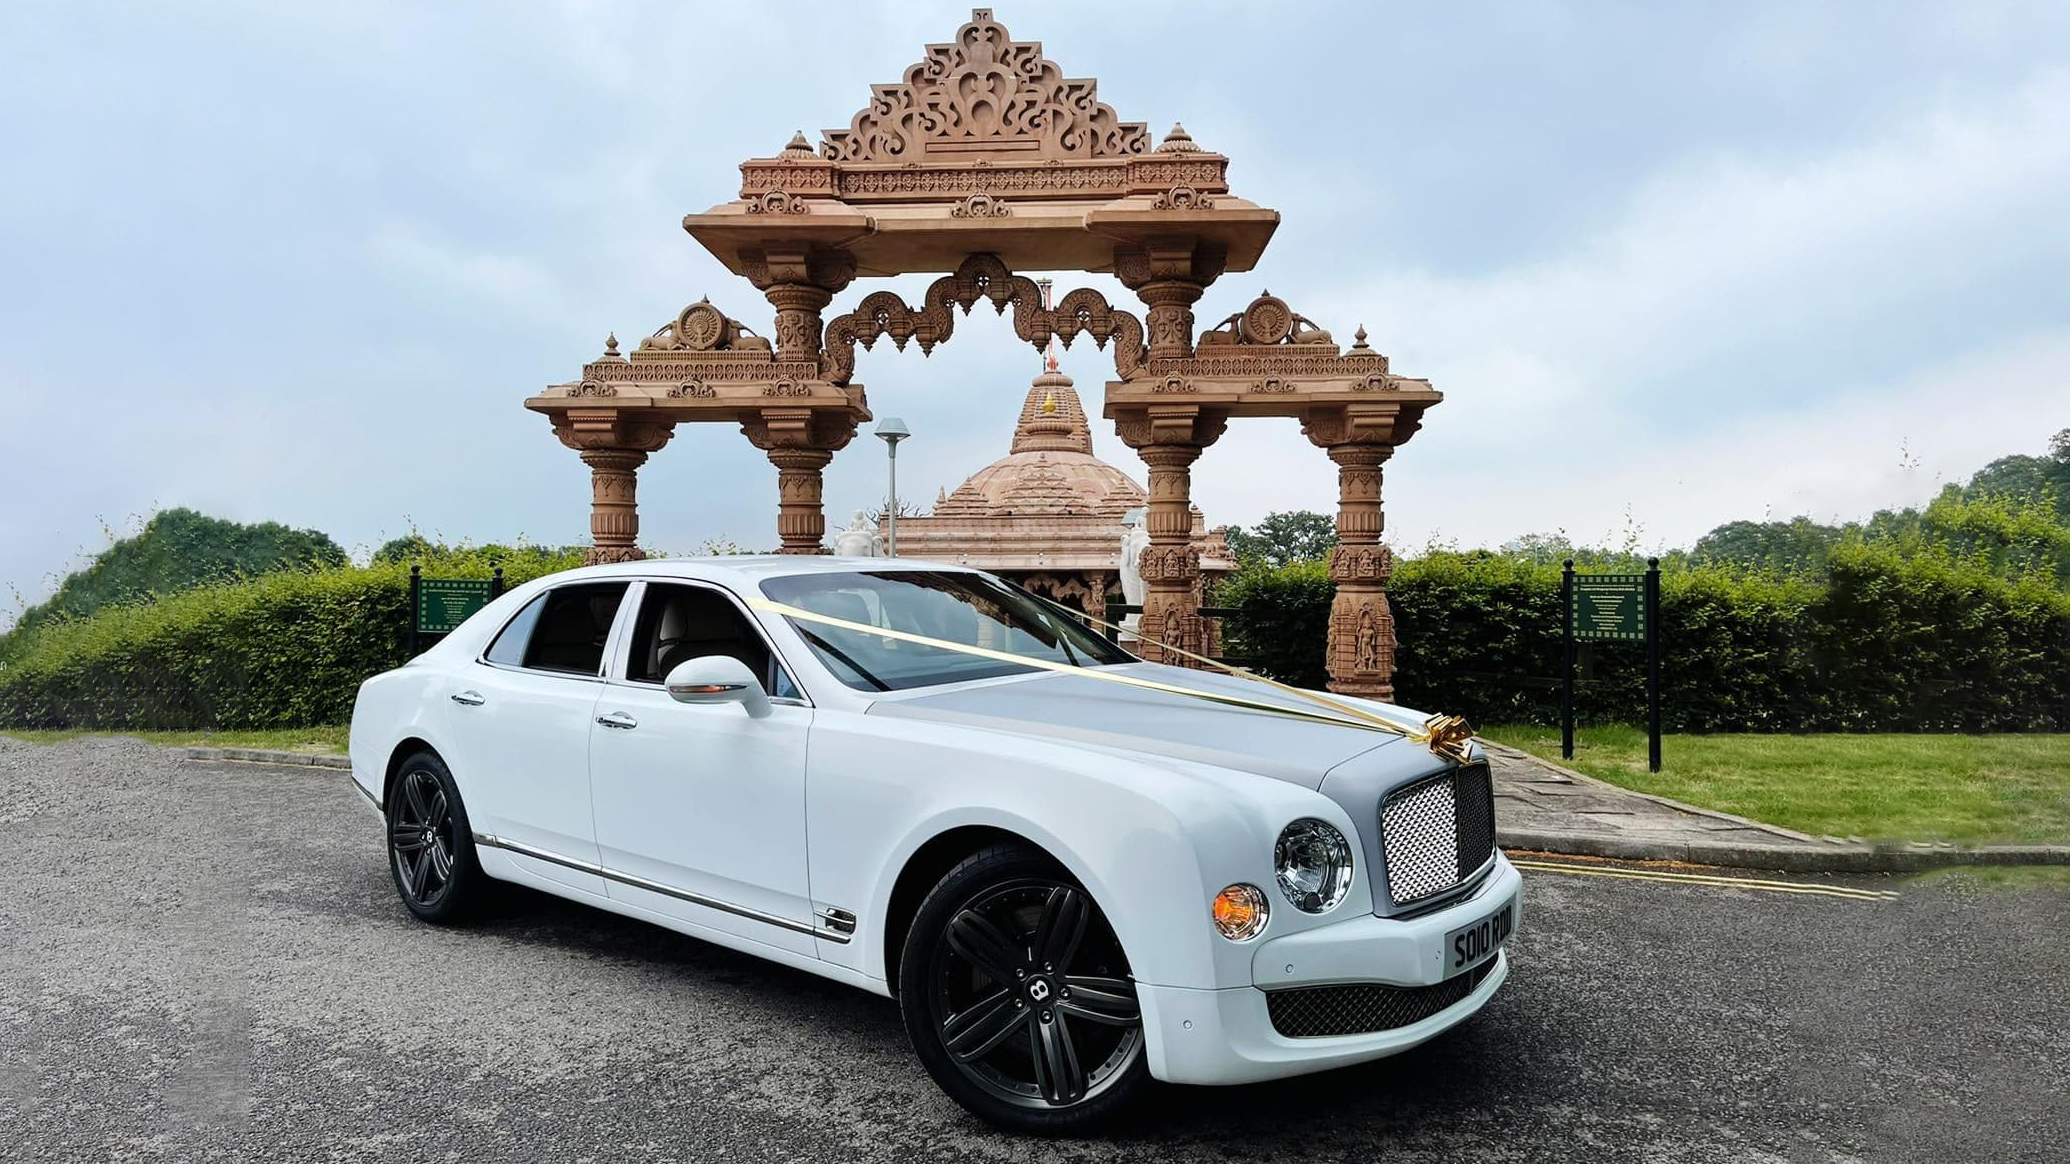 Modern Bentley Mulsanne with Black alloy wheels and Gold ribbons park in front of an Asian Temple in Ampthill.